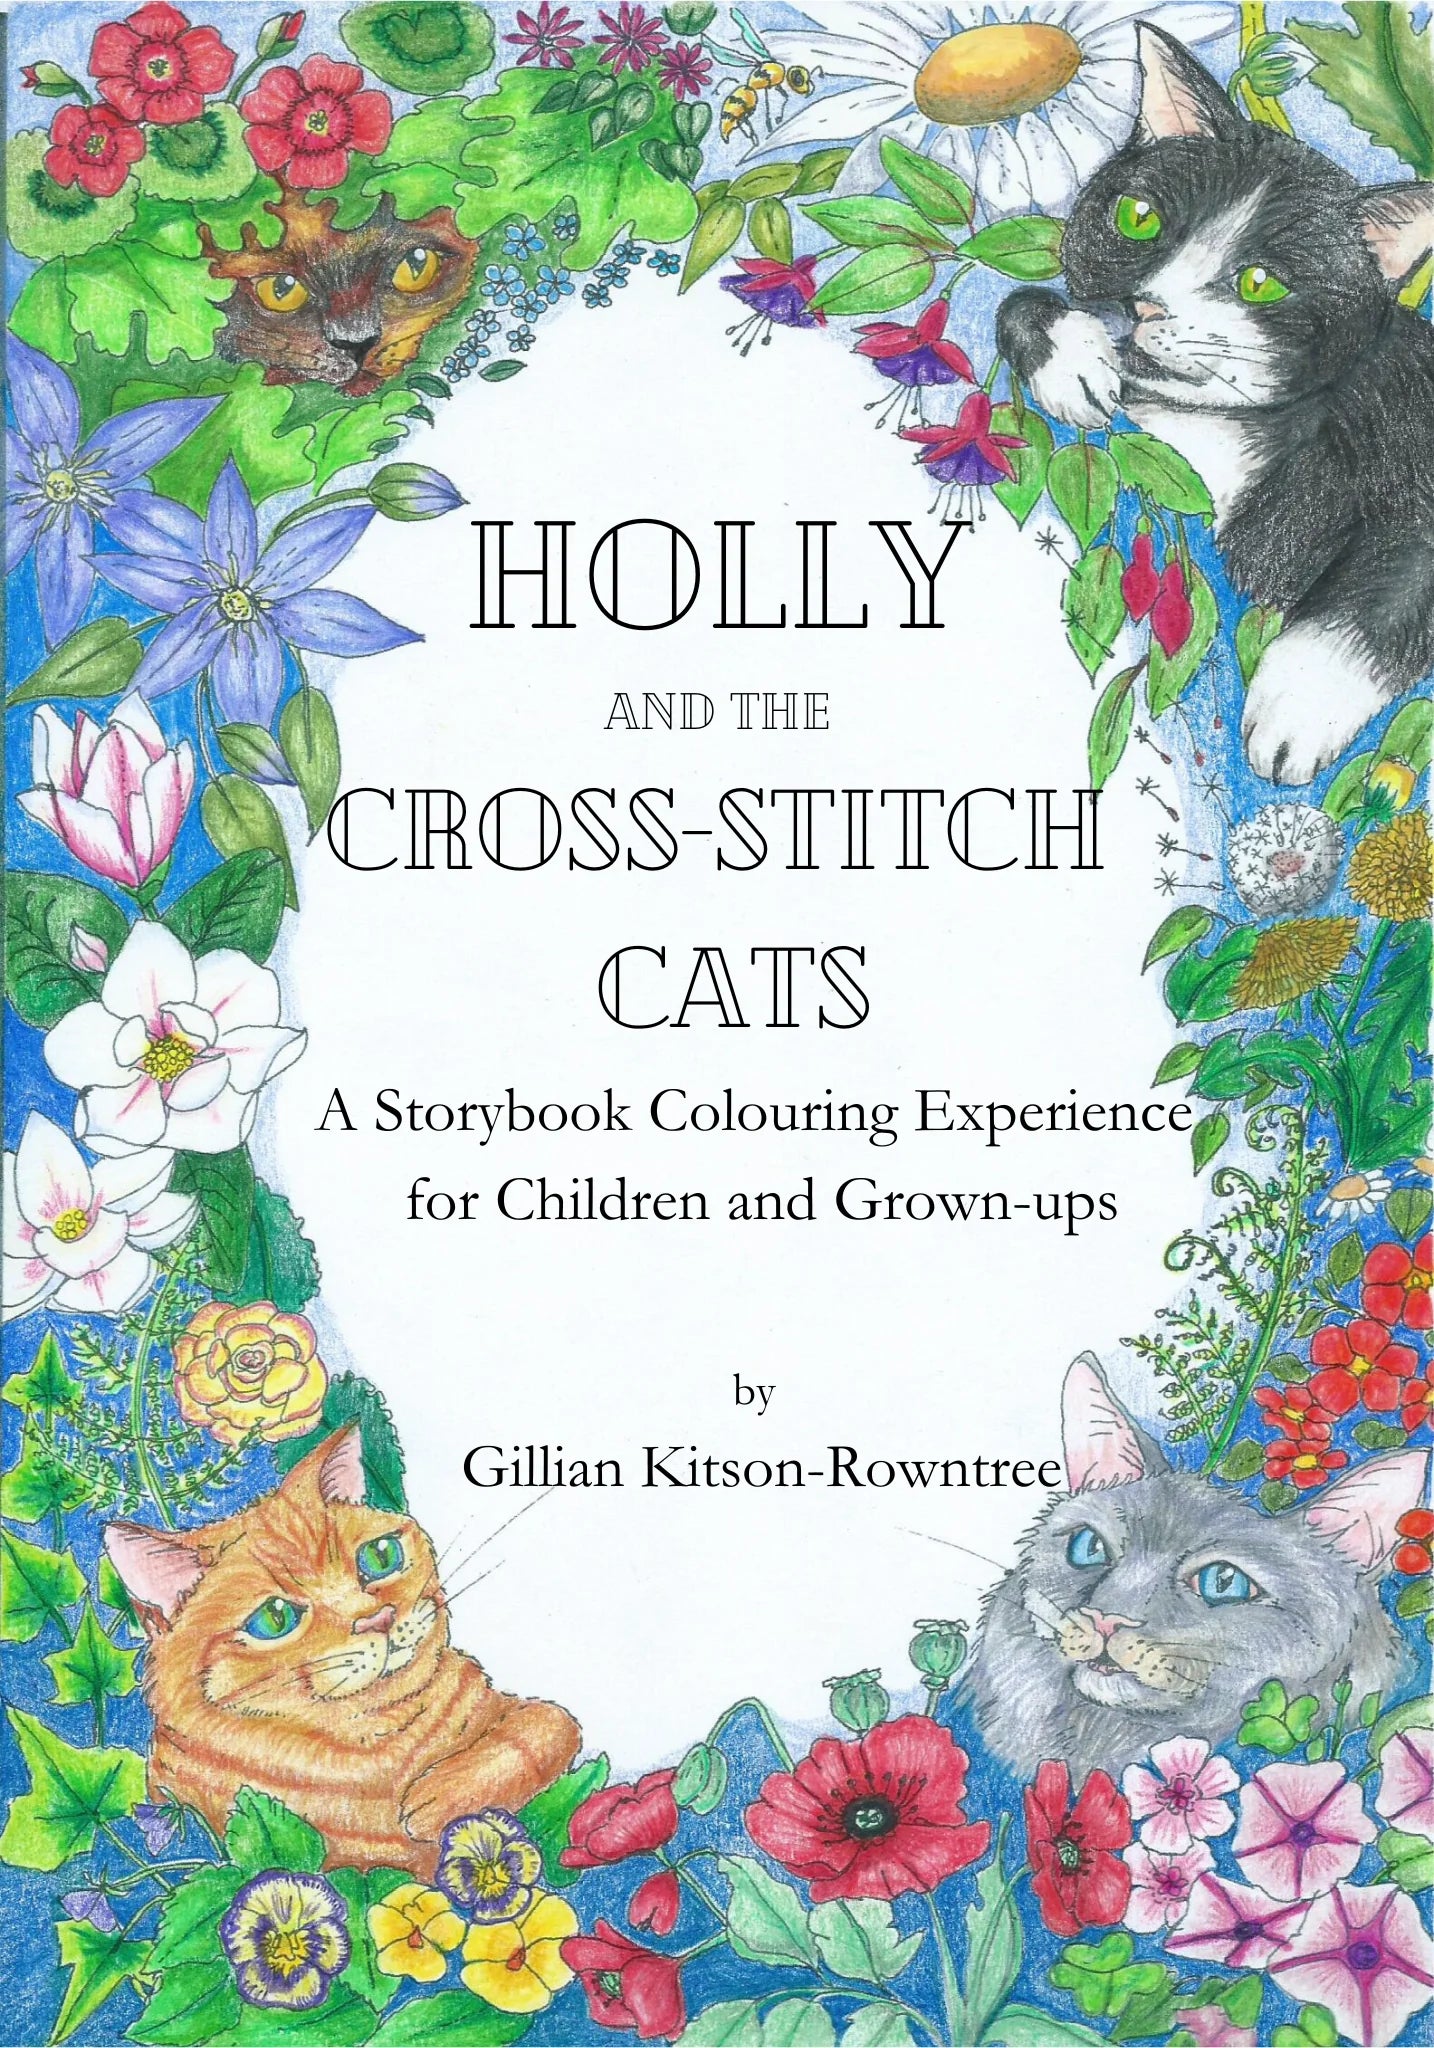 'Holly and the Cross-Stitch Cats' - A Storybook Colouring Experience for Children and Grown-ups